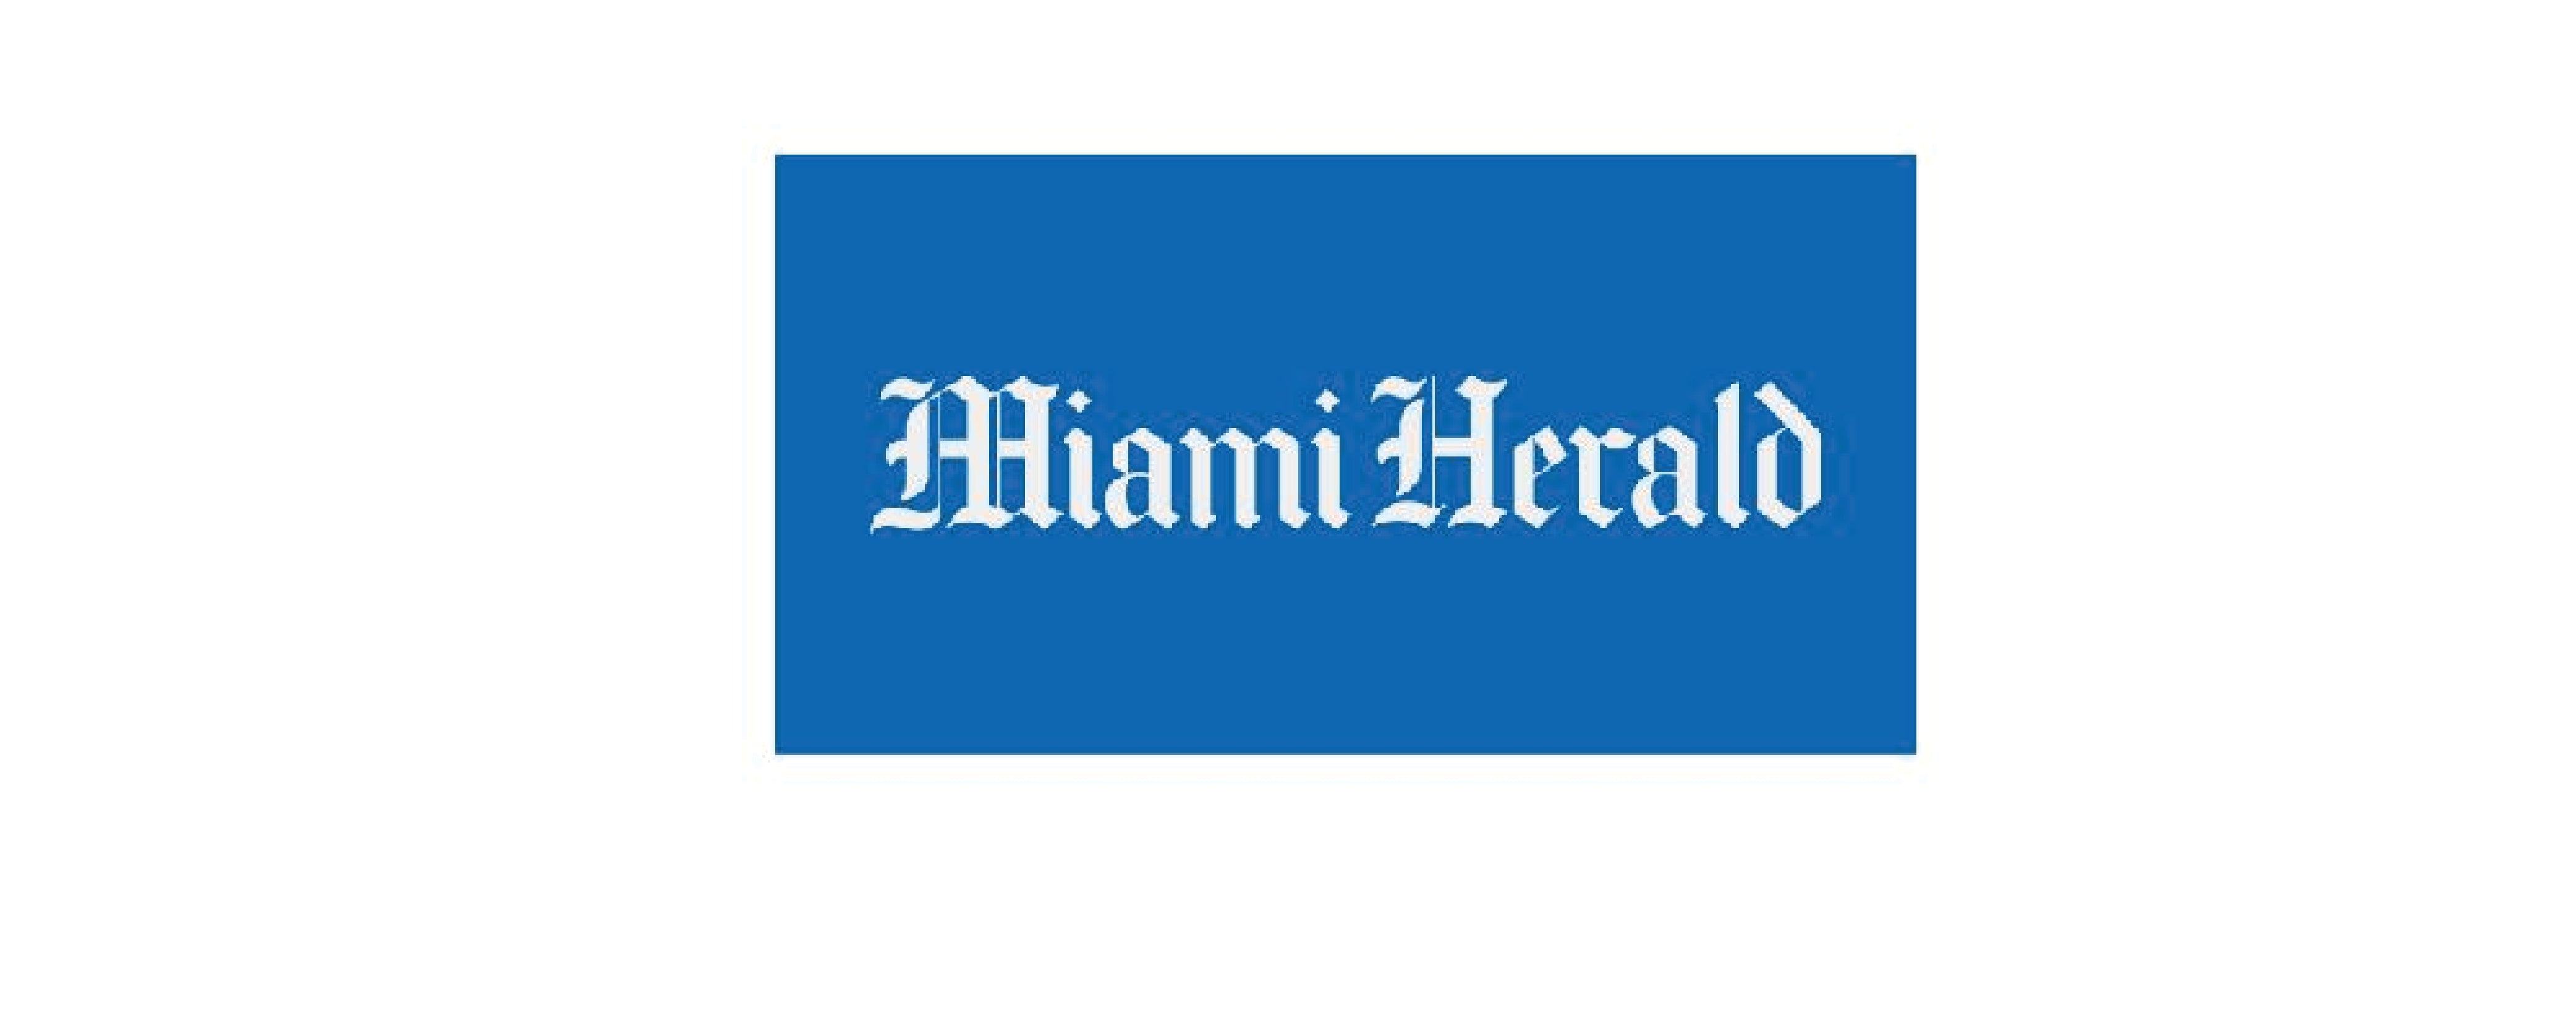 The Miami Herald - Gifts That Give Back